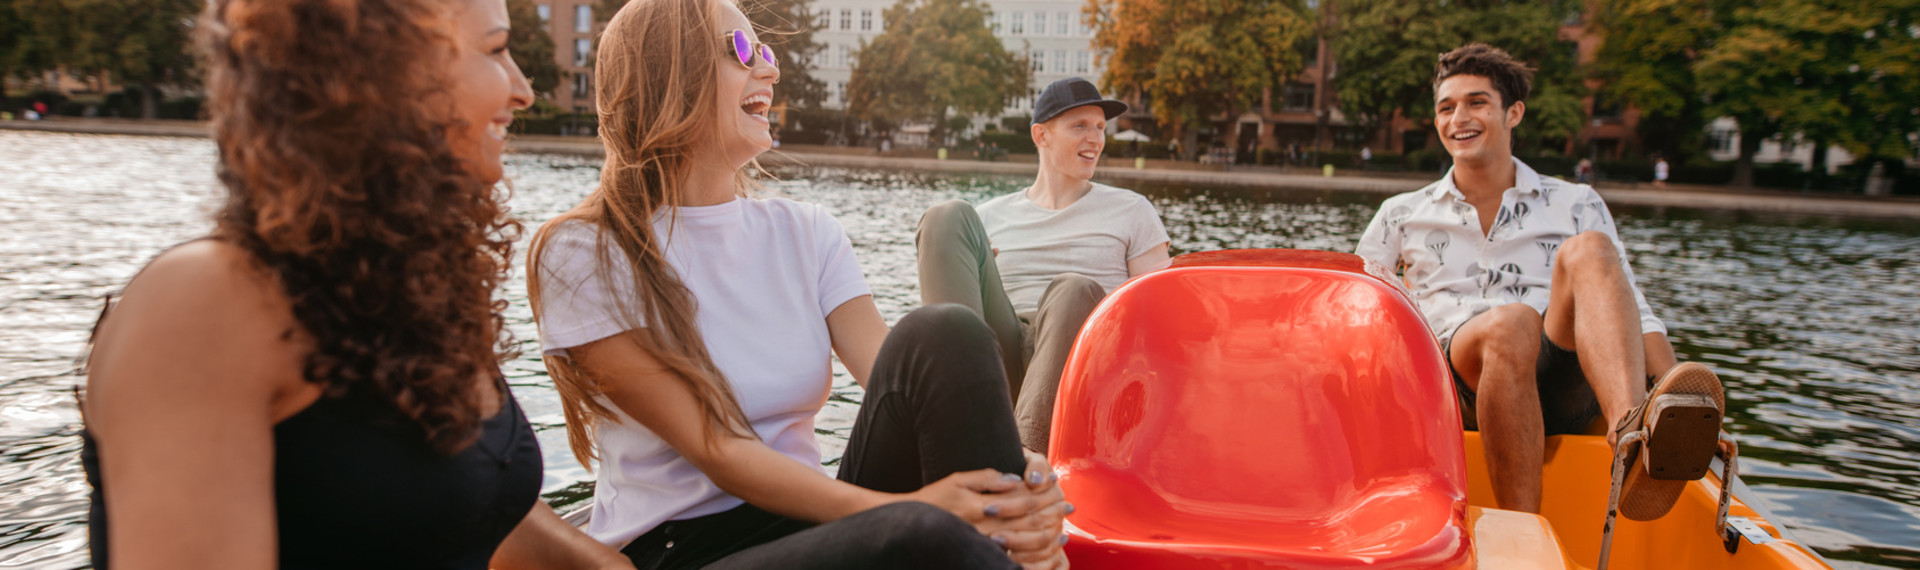 Pedalo Challenge in Amsterdam | Pissup